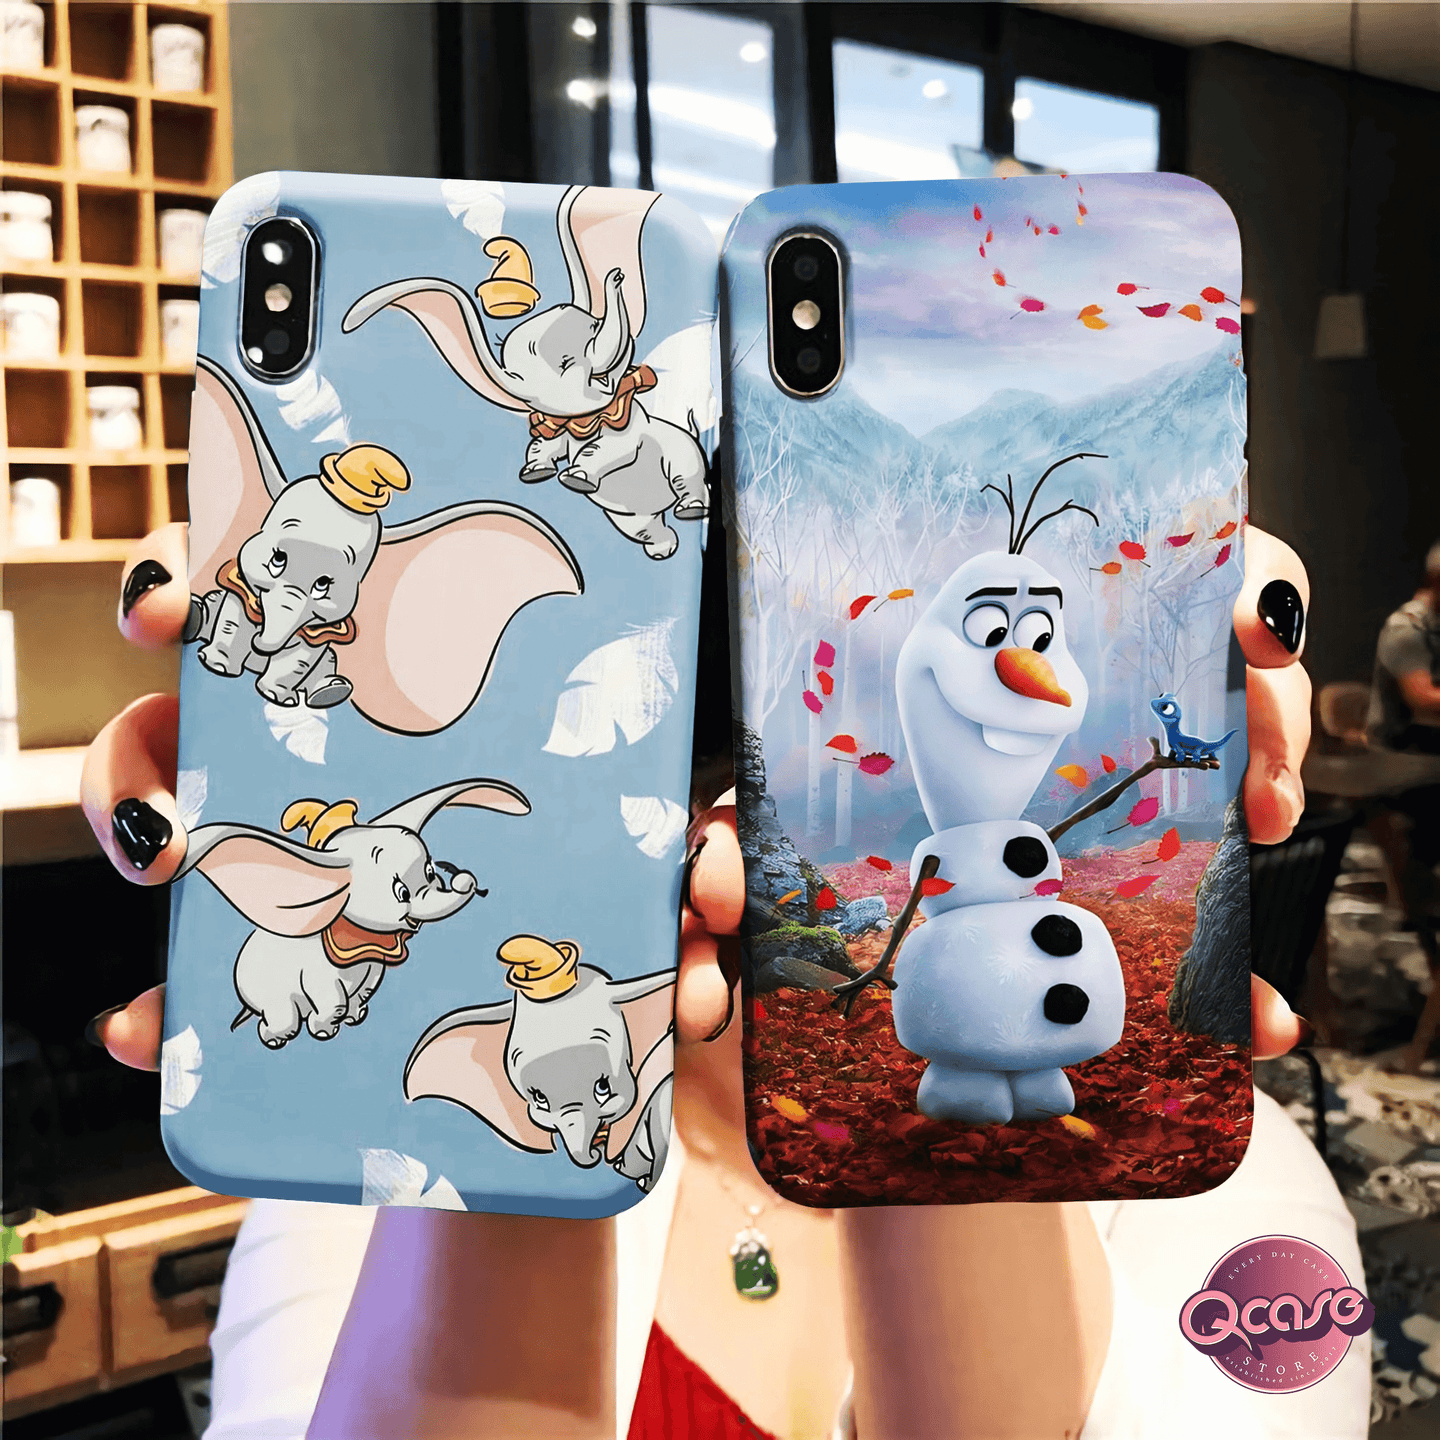 Dumbo and Olaf Phone Covers